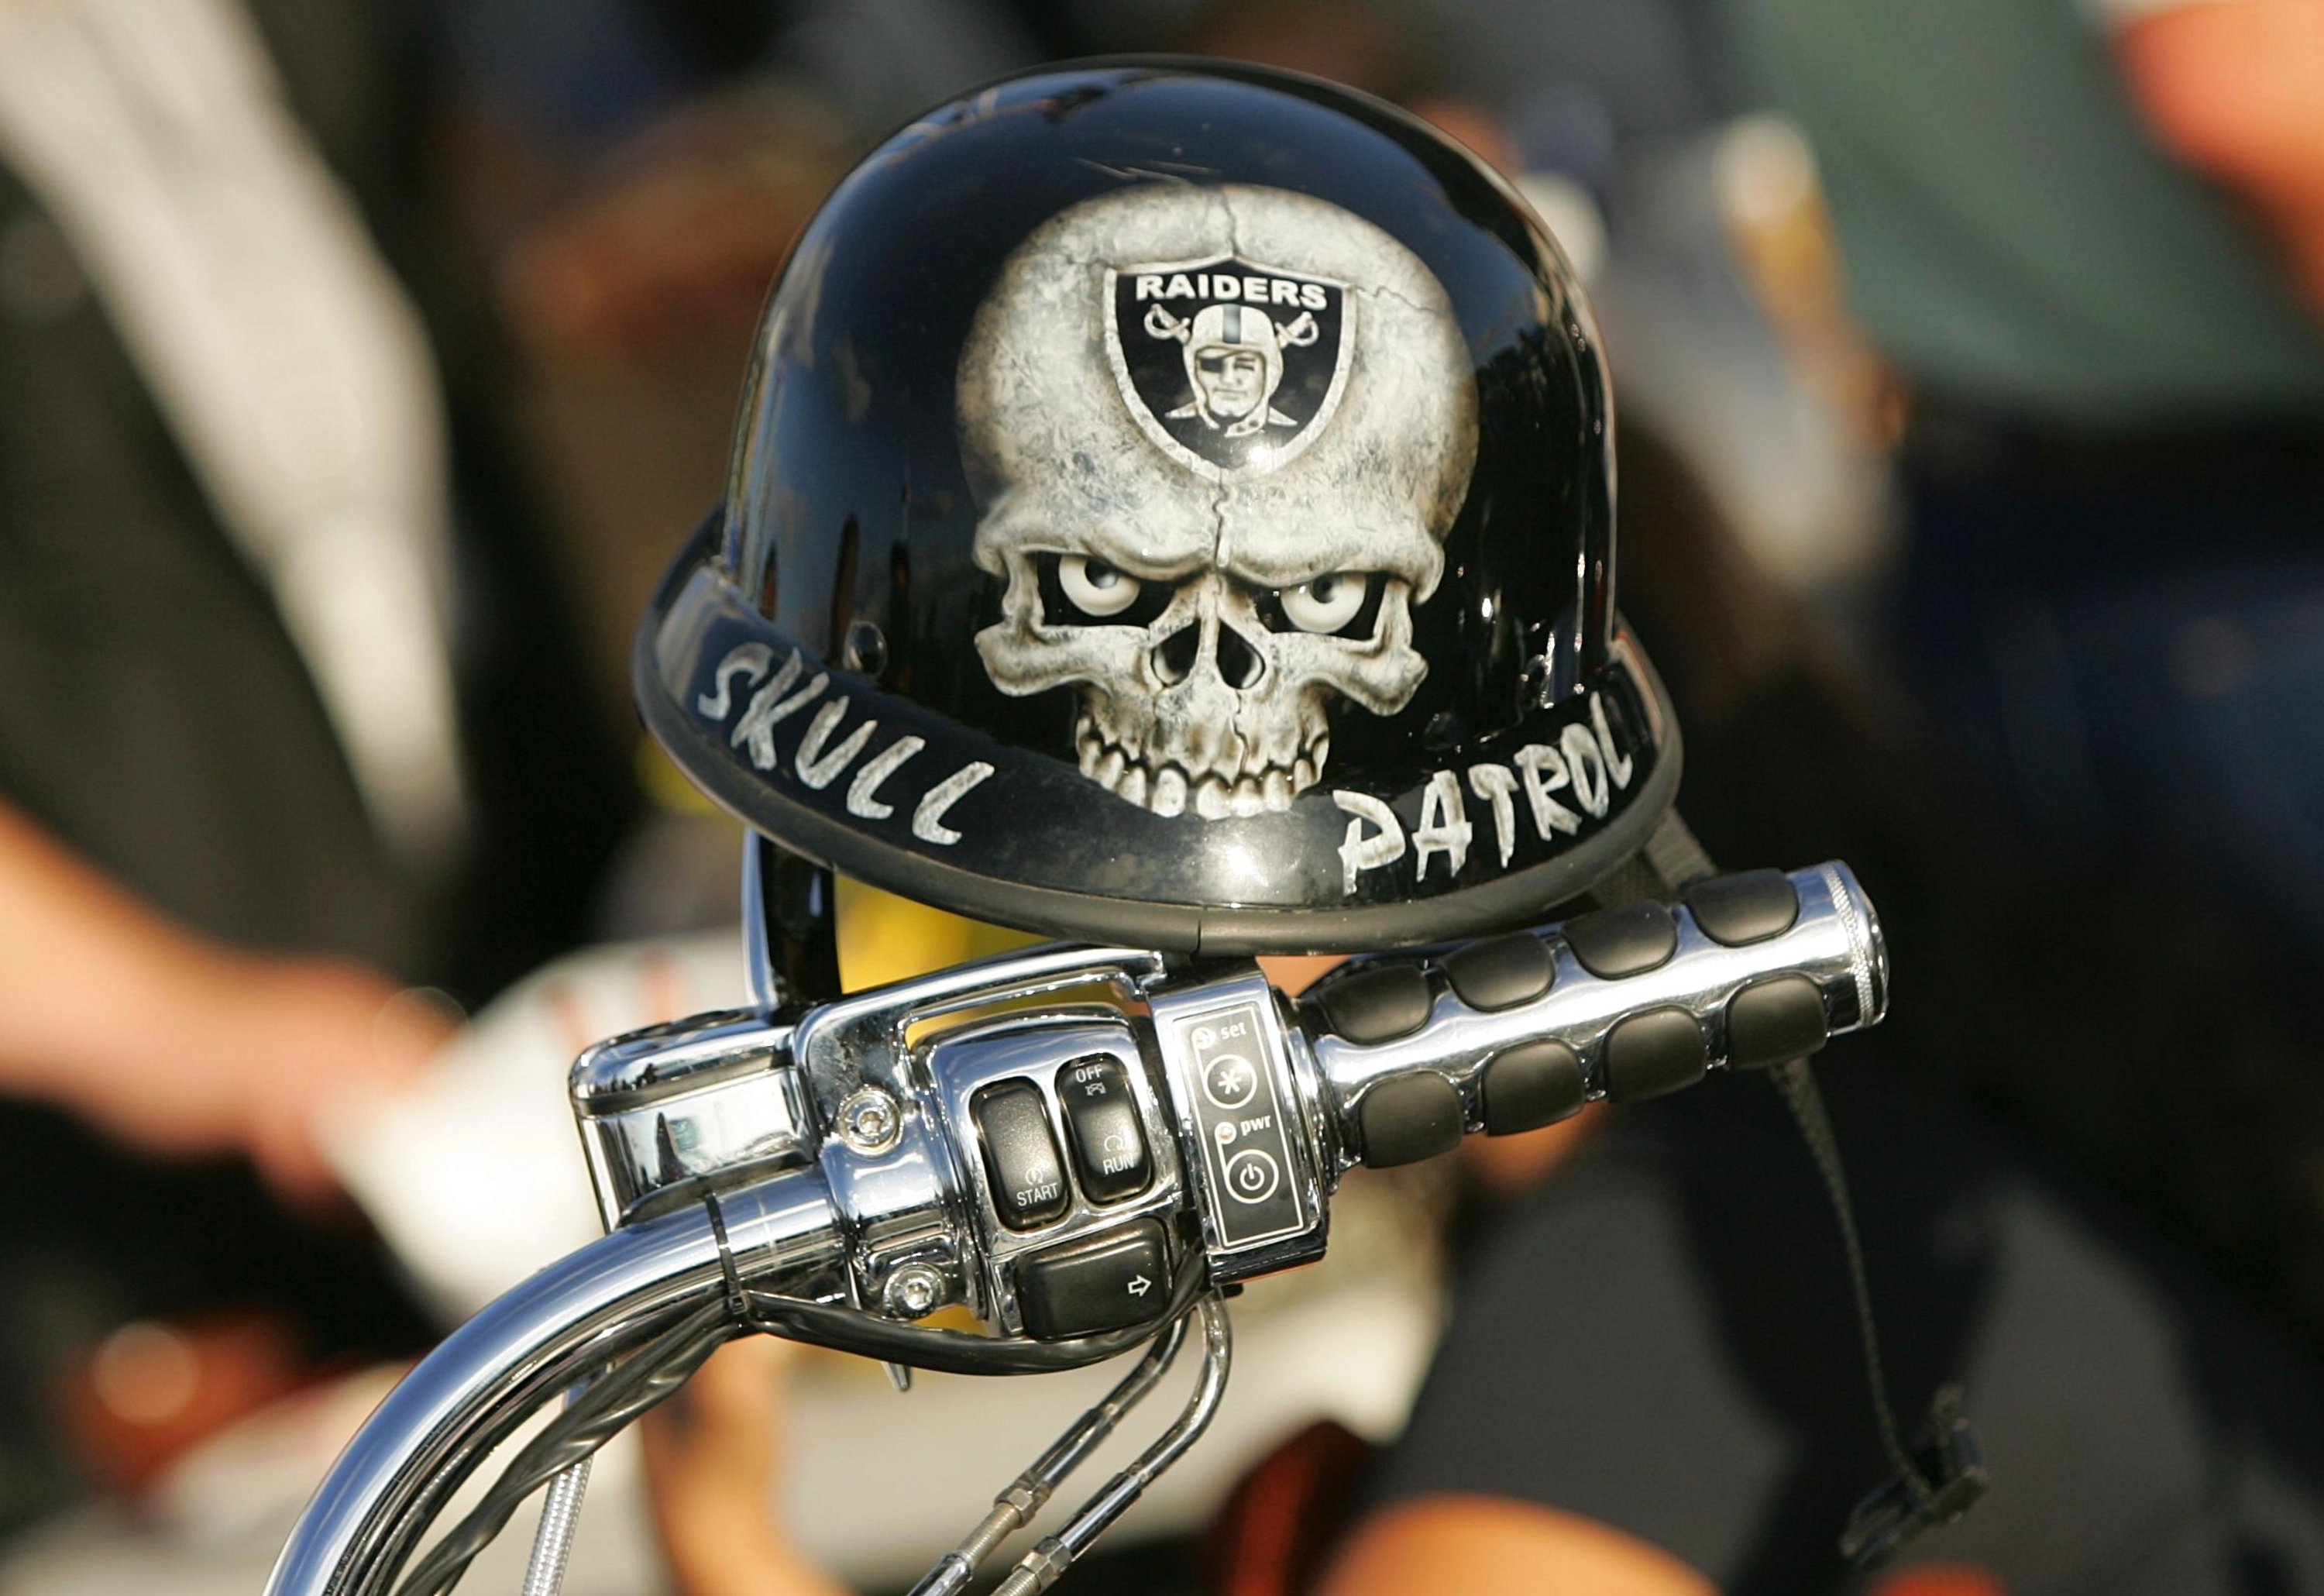 OAKLAND, CA - SEPTEMBER 14:  A mini biker helmet with a Oakland Raiders logo is seen on the handle bar of a motorcycle in the parking lot outside Oakland-Alameda County Coliseum prior to the Raiders playing against the San Diego Chargers against the Oakla